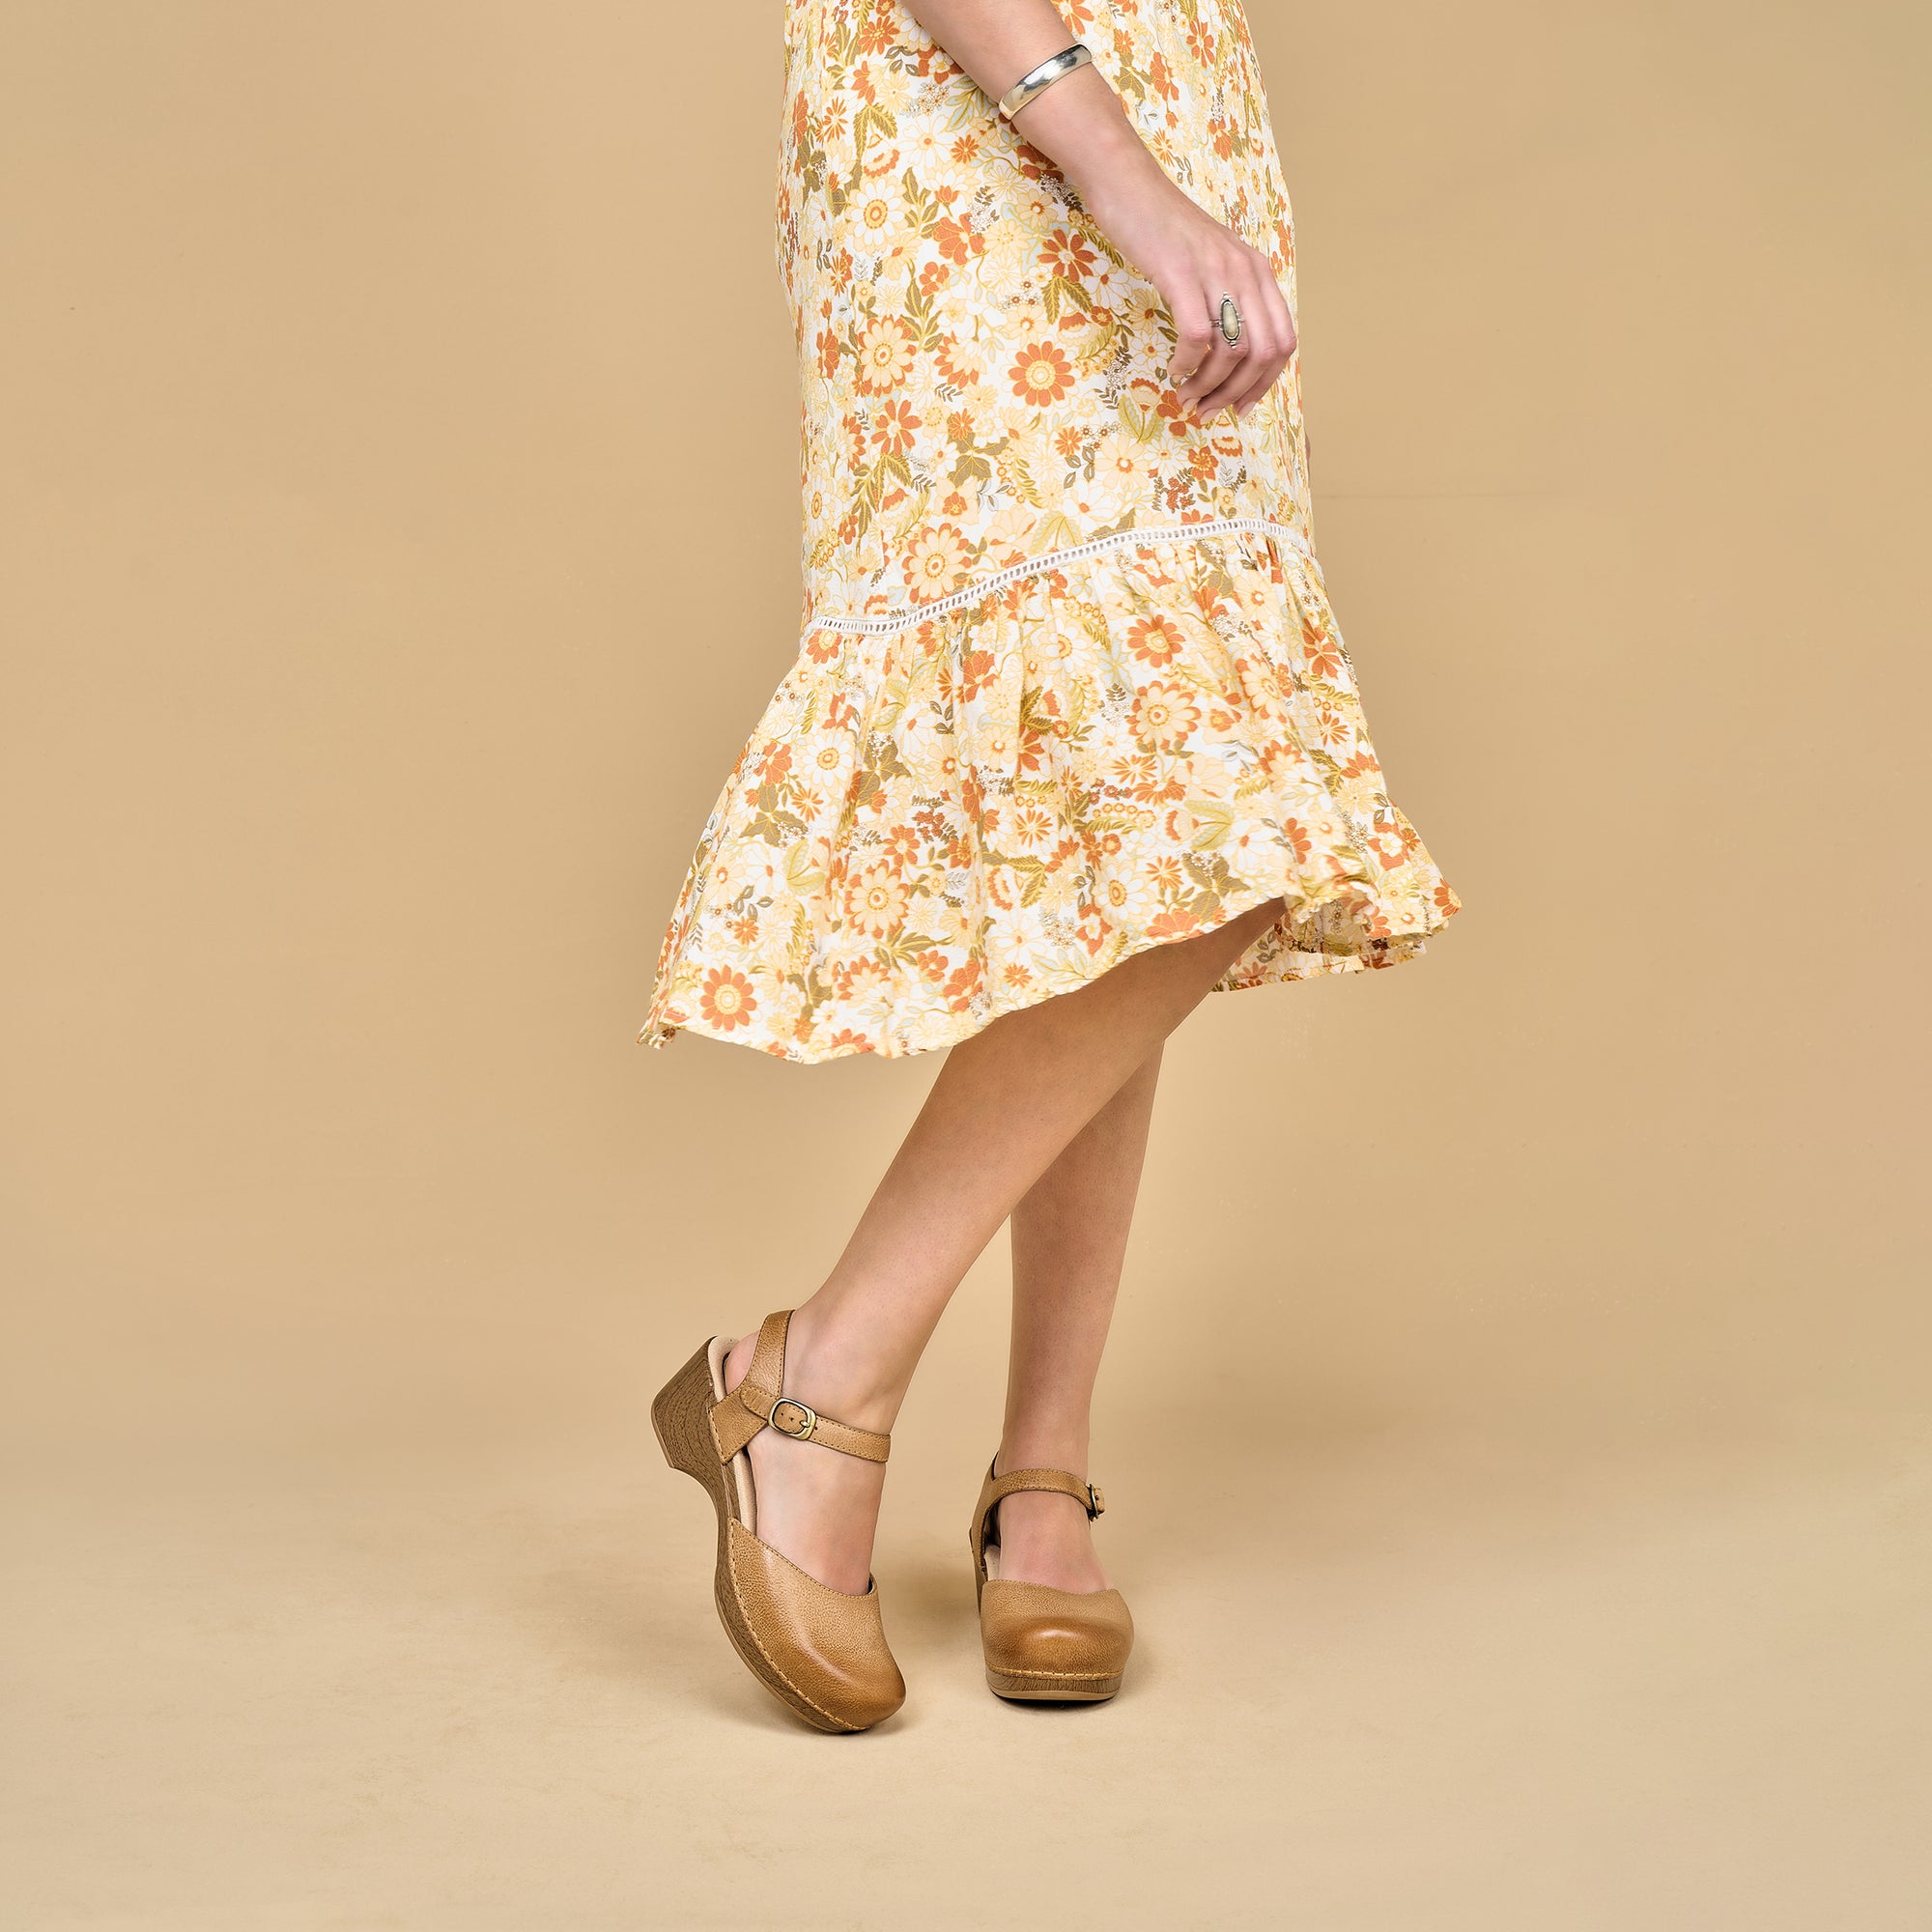 Tan Mary Jane sandals shown on foot with a flowery dress.